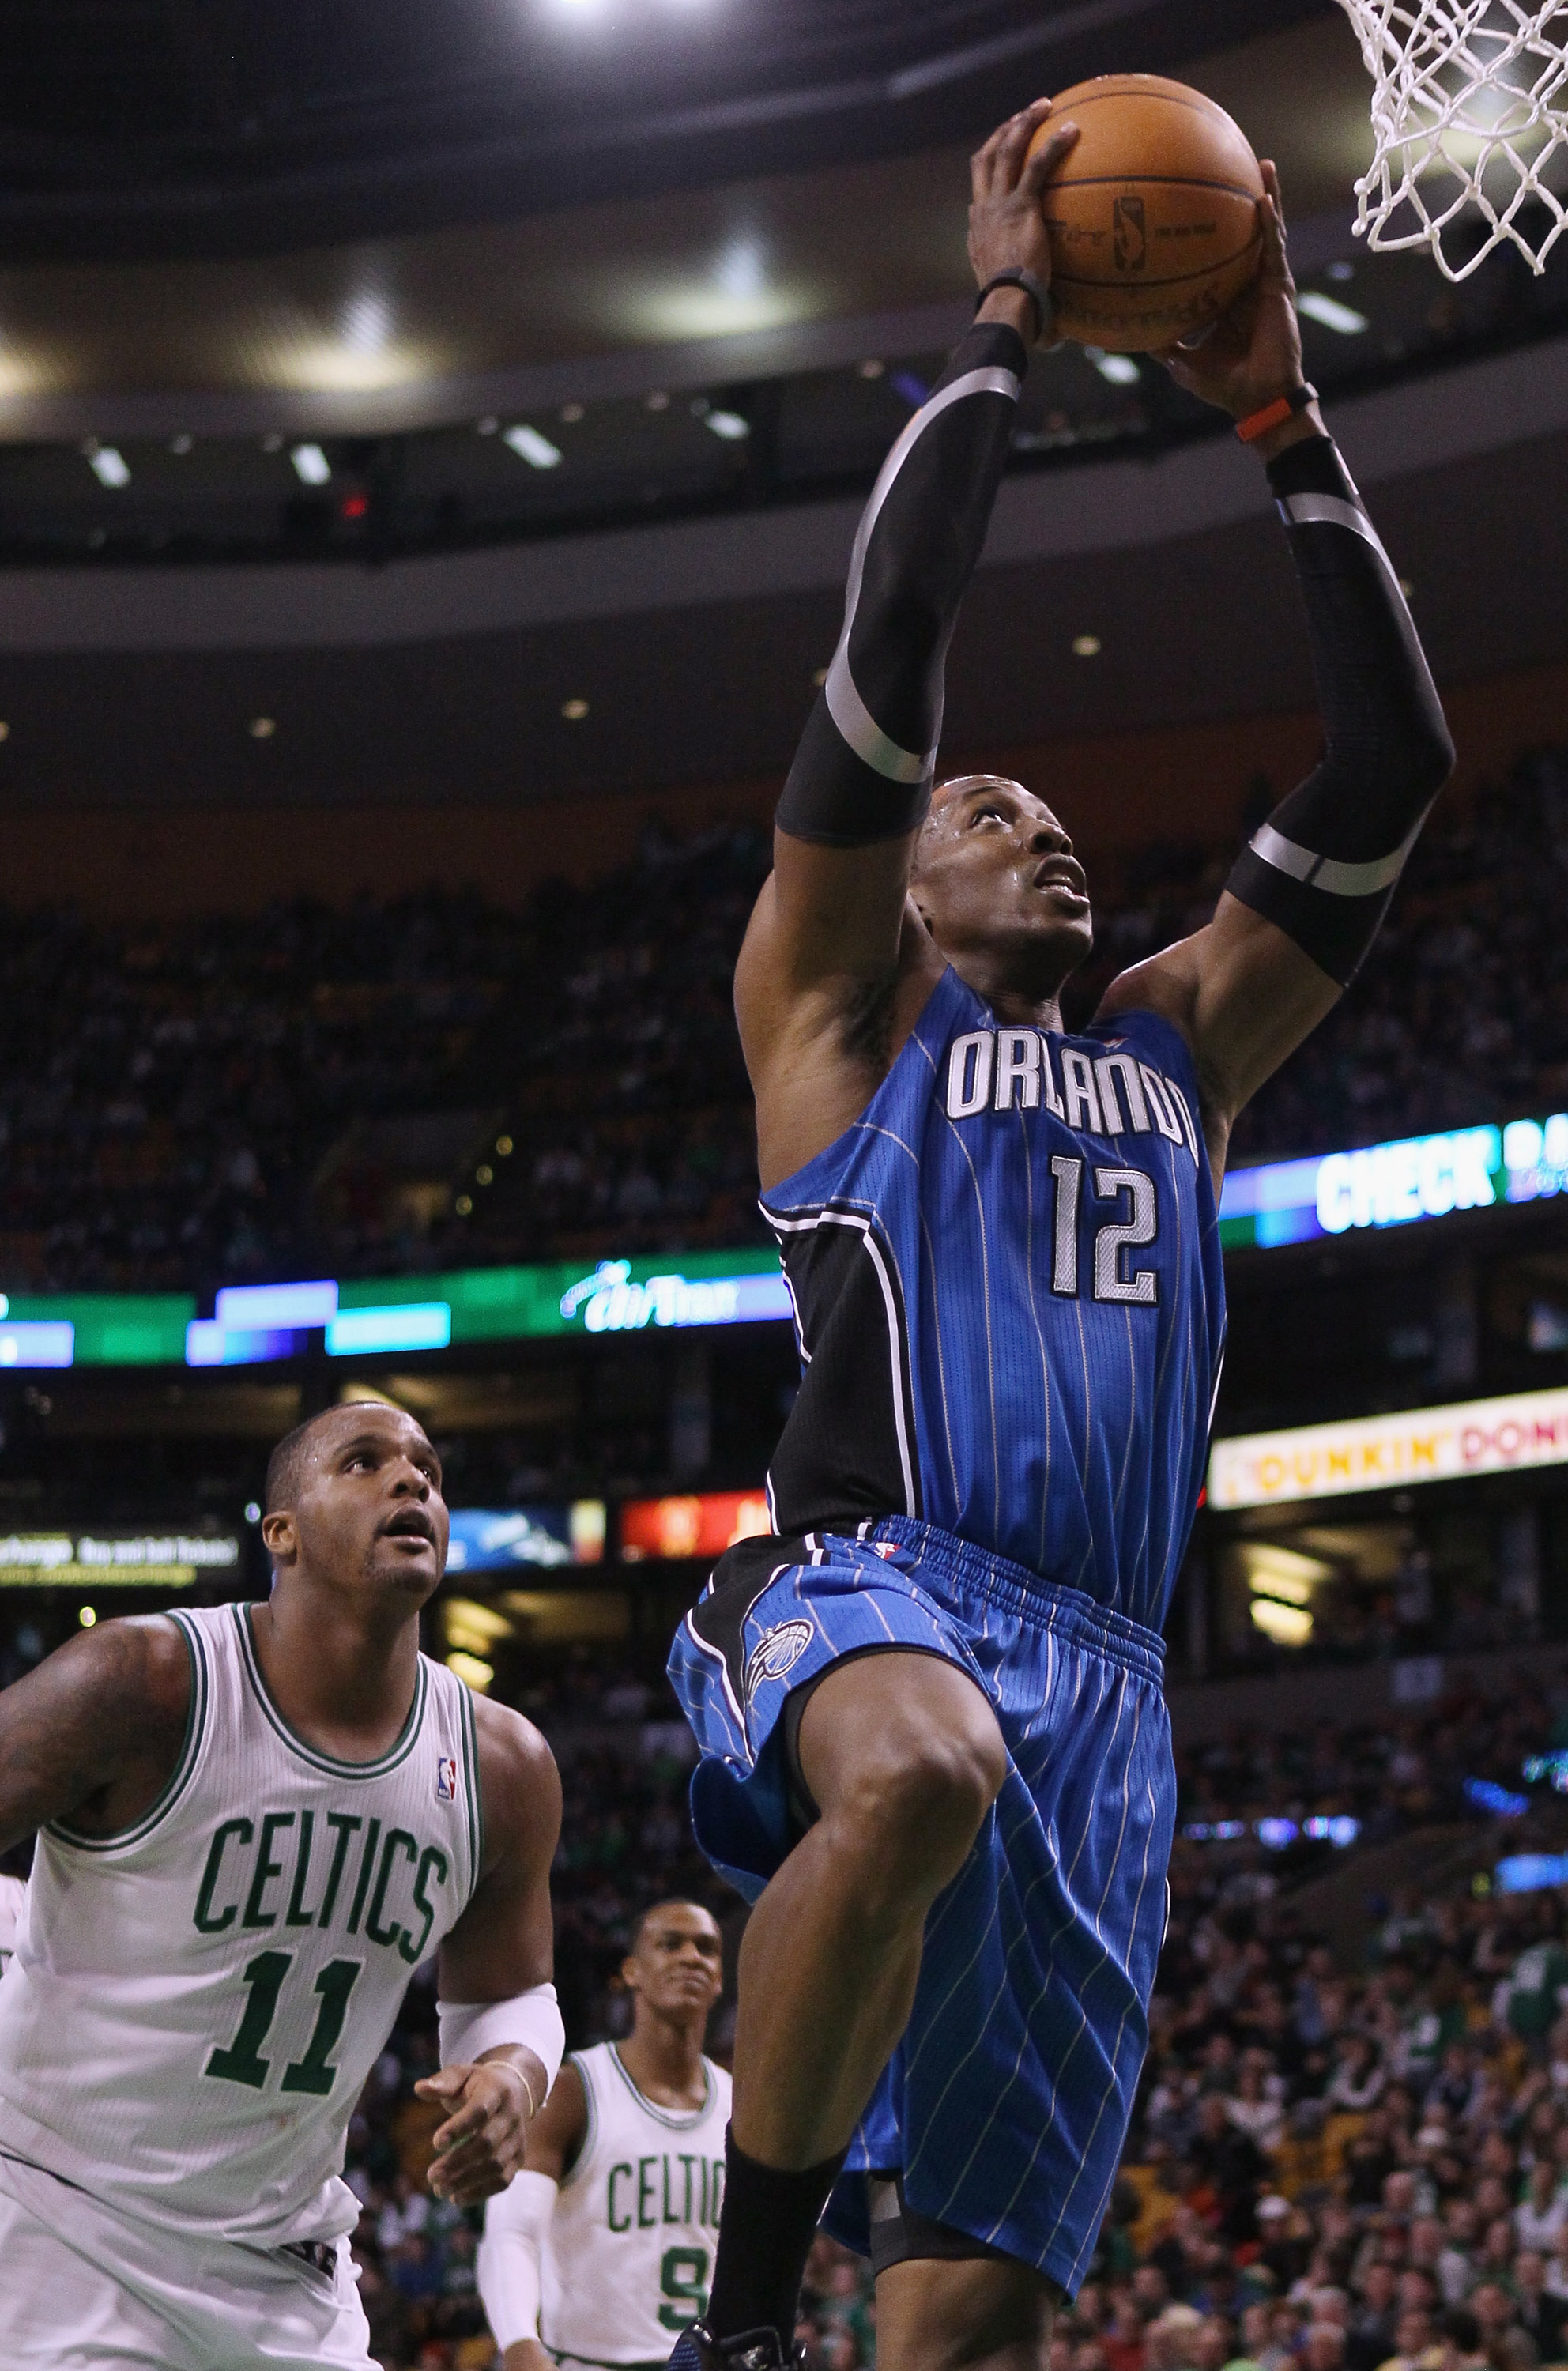 BOSTON, MA - FEBRUARY 06:  Dwight Howard #12 of the Orlando Magic takes a shot as Glen Davis #11 of the Boston Celtics defends on February 6, 2011 at the TD Garden in Boston, Massachusetts. The Celtics defeated the Magic 91-80. NOTE TO USER: User expressl